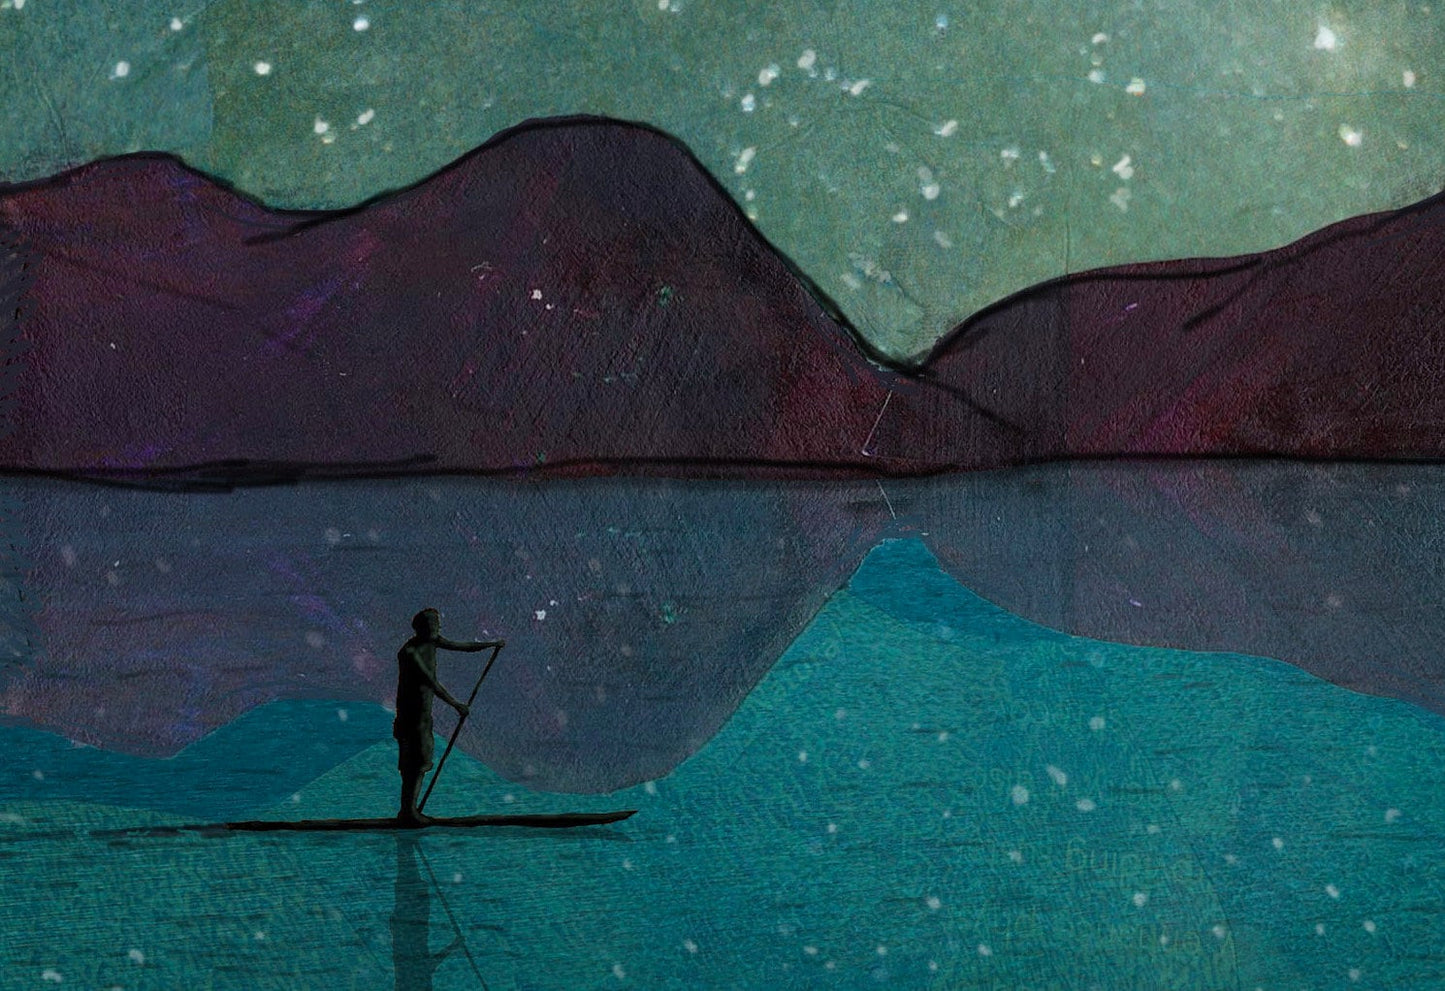 Greeting Card of a Paper Collage of a person stand up paddling on a lake under the night sky stars - inspirational - Blank Inside